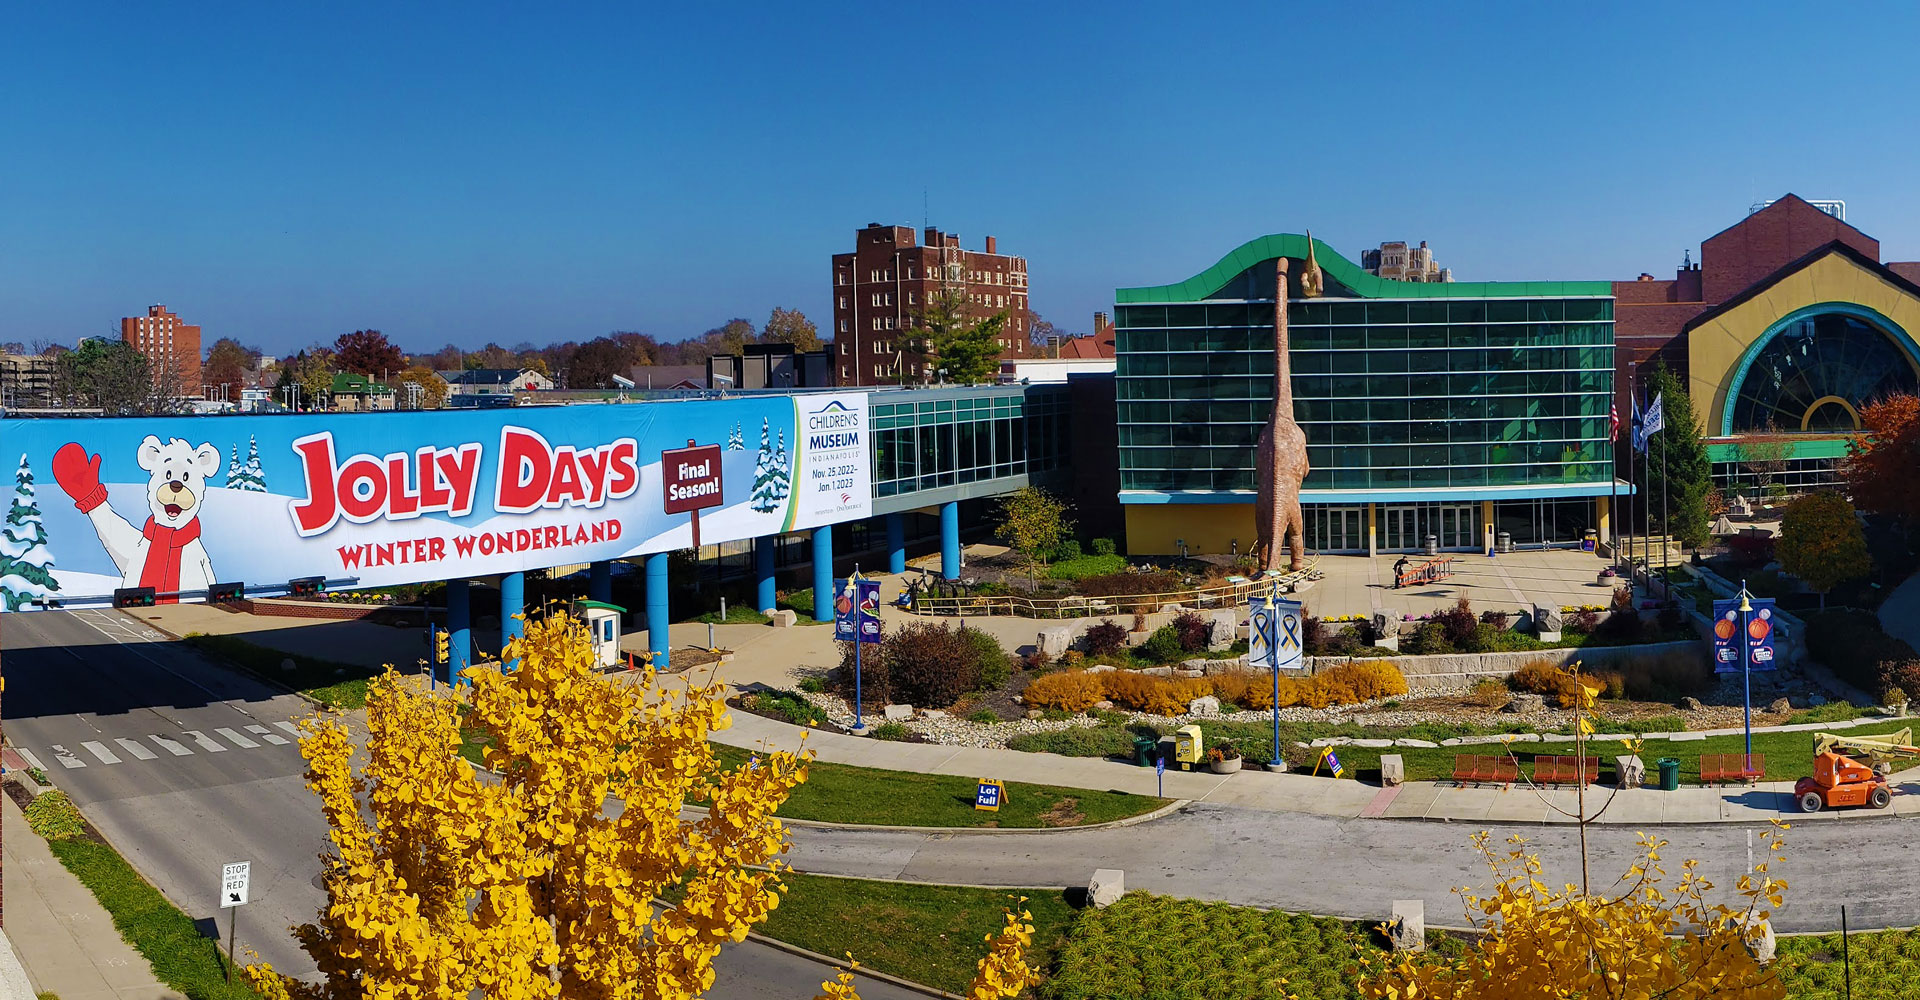 Wide shot of the outside of the museum showing the Jolly Days banner on the skywalk.